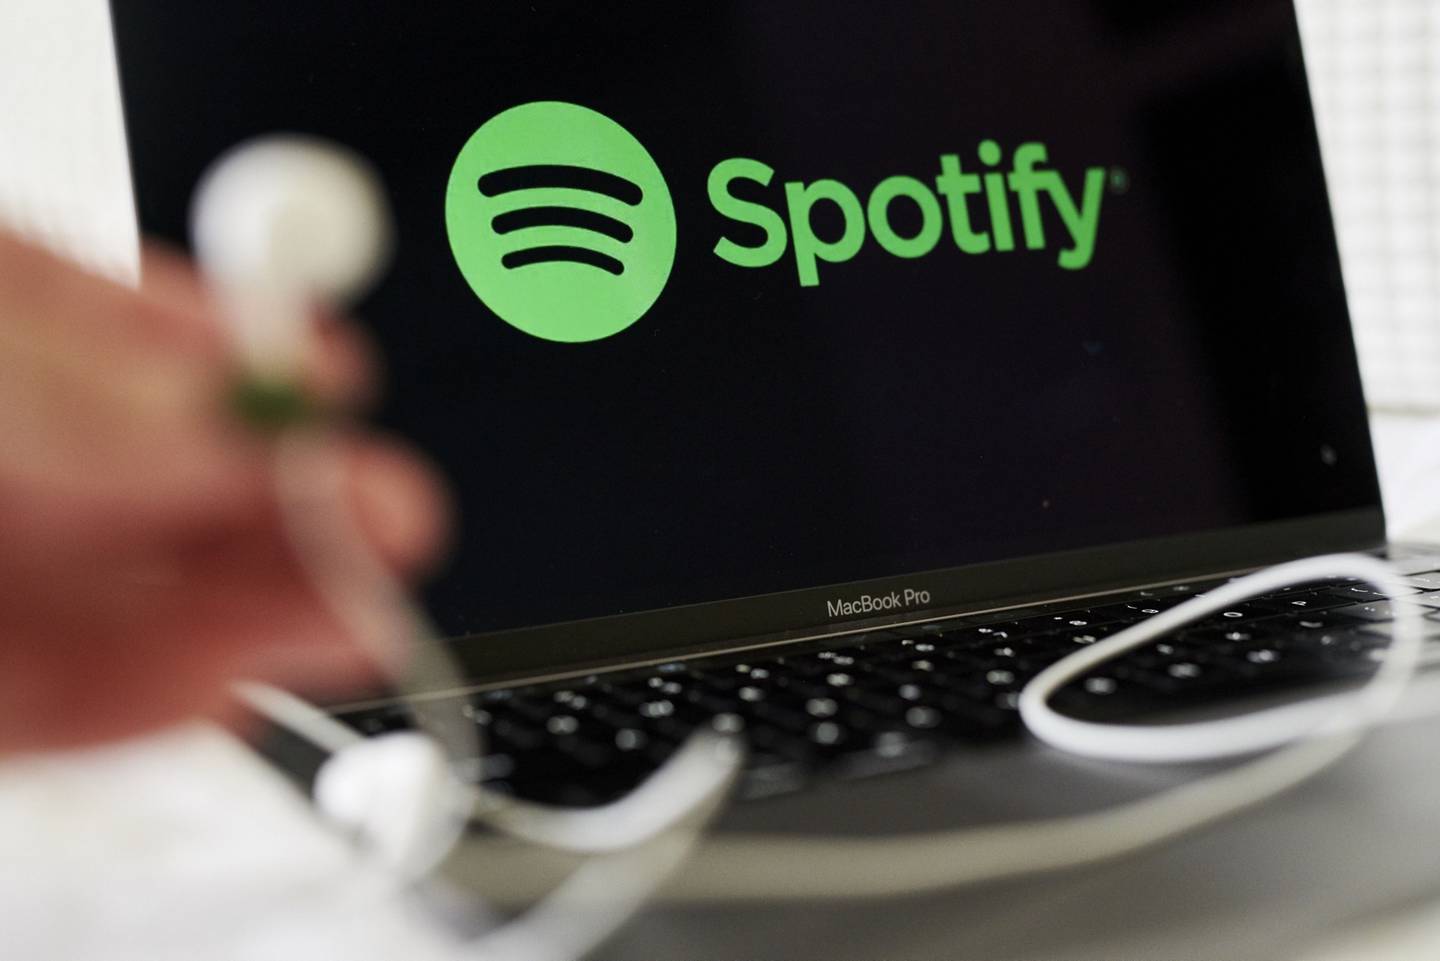 Spotify’s monthly active users grew 19% year-over-year to 419 million, excluding a one-time benefit of 3 million users.